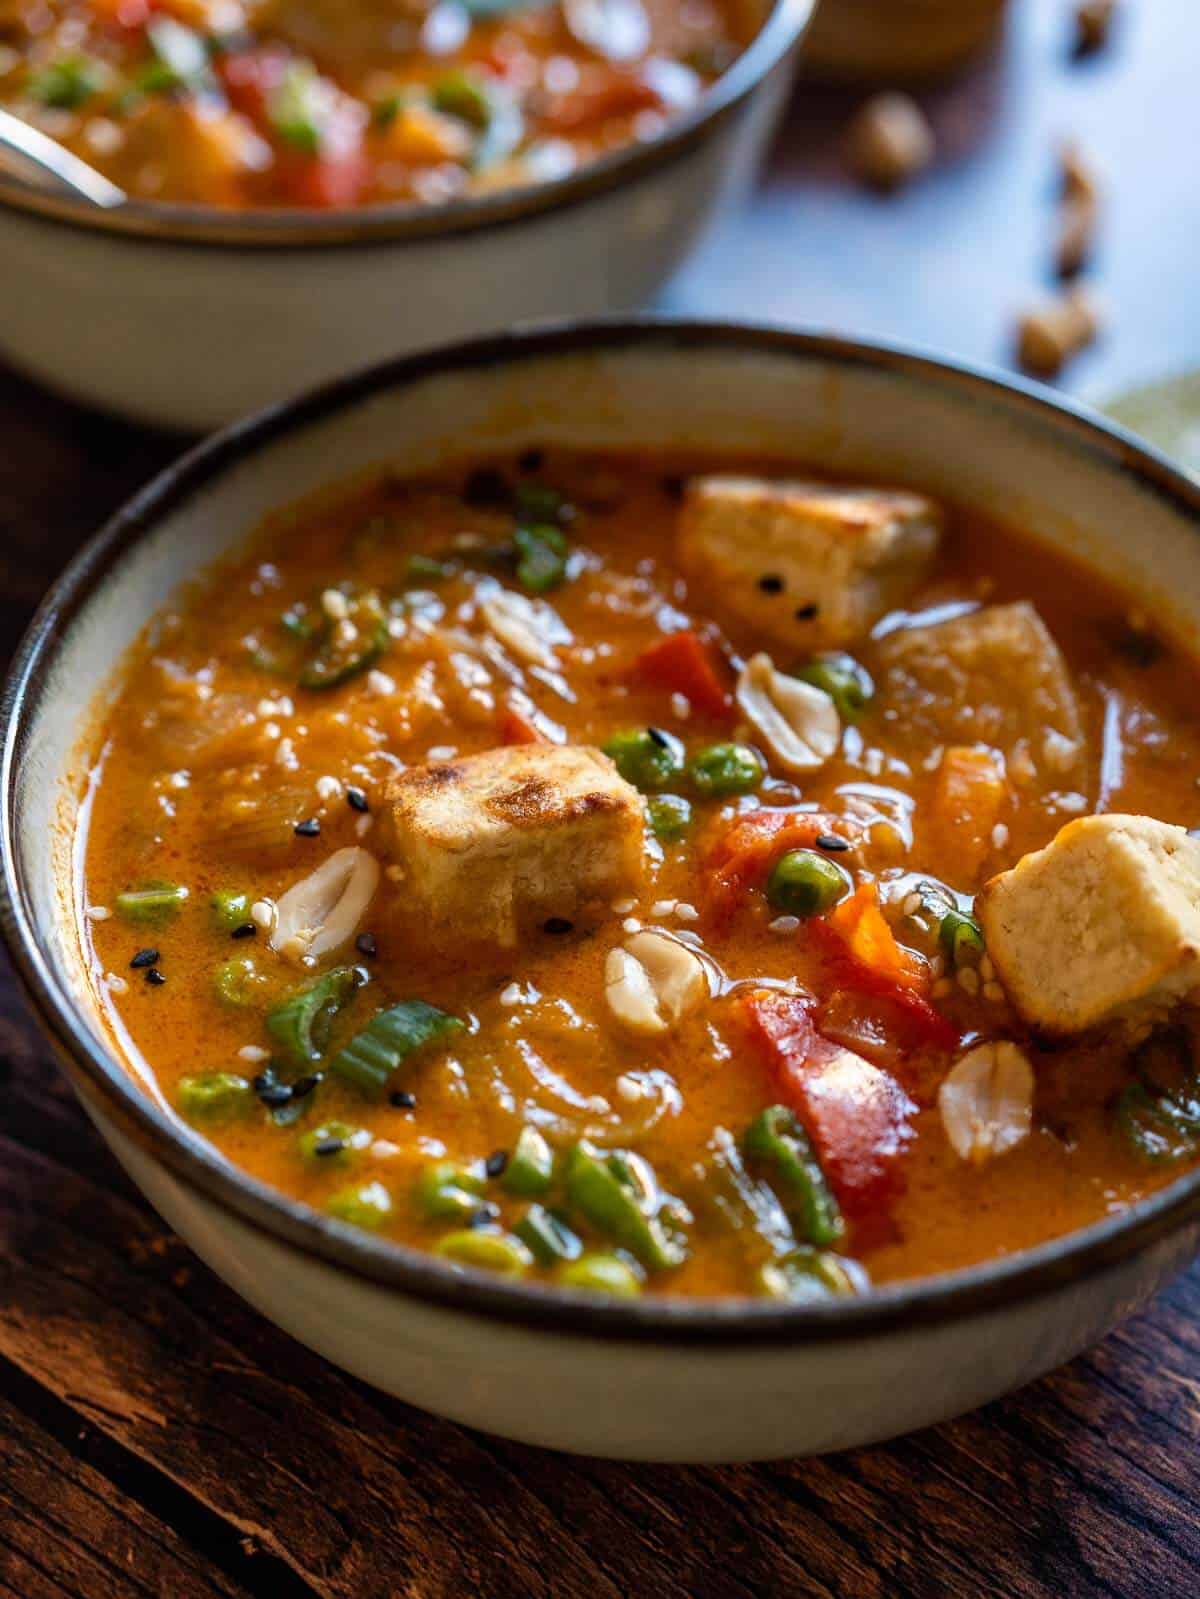 serve the massaman curry with crispy tofu on top and a dash of lemon juice.